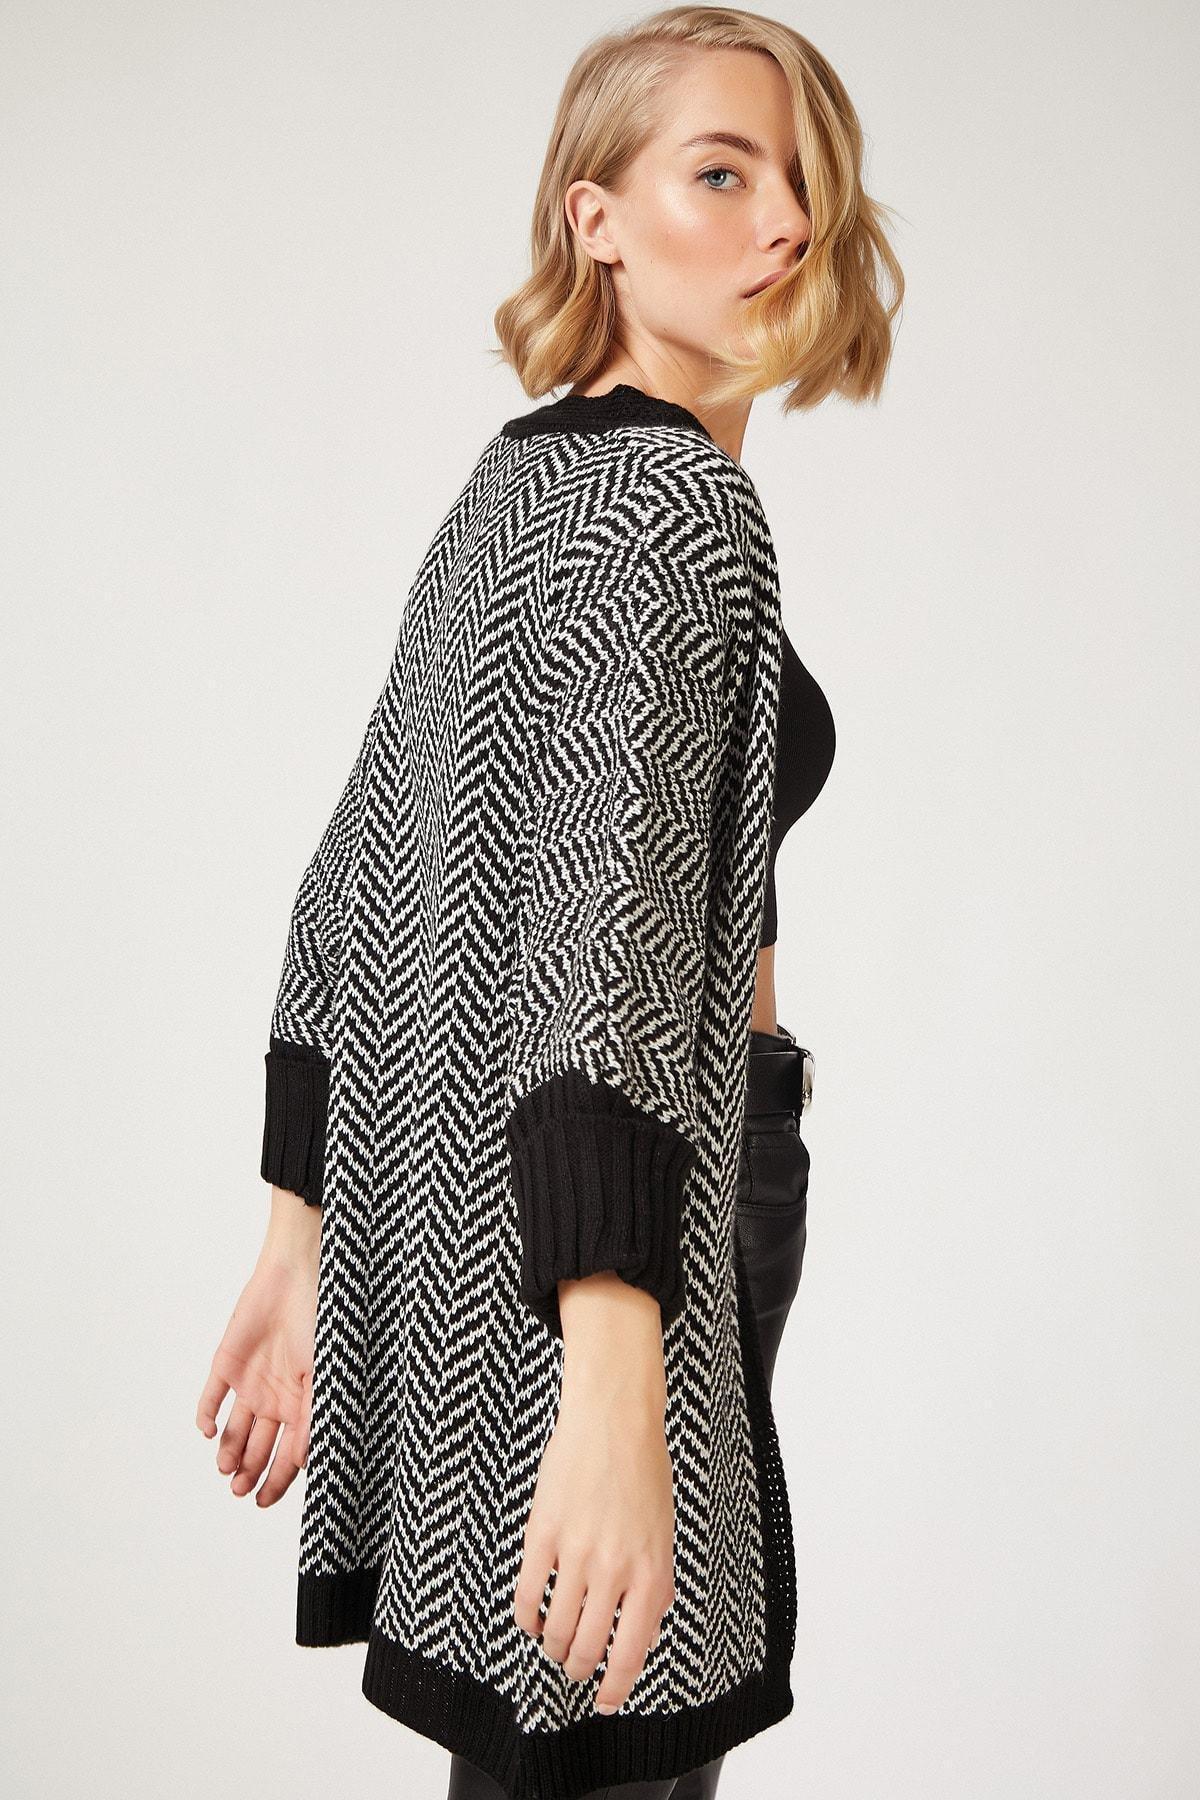 Happiness Istanbul - Black Oversized Knitted Cardigan